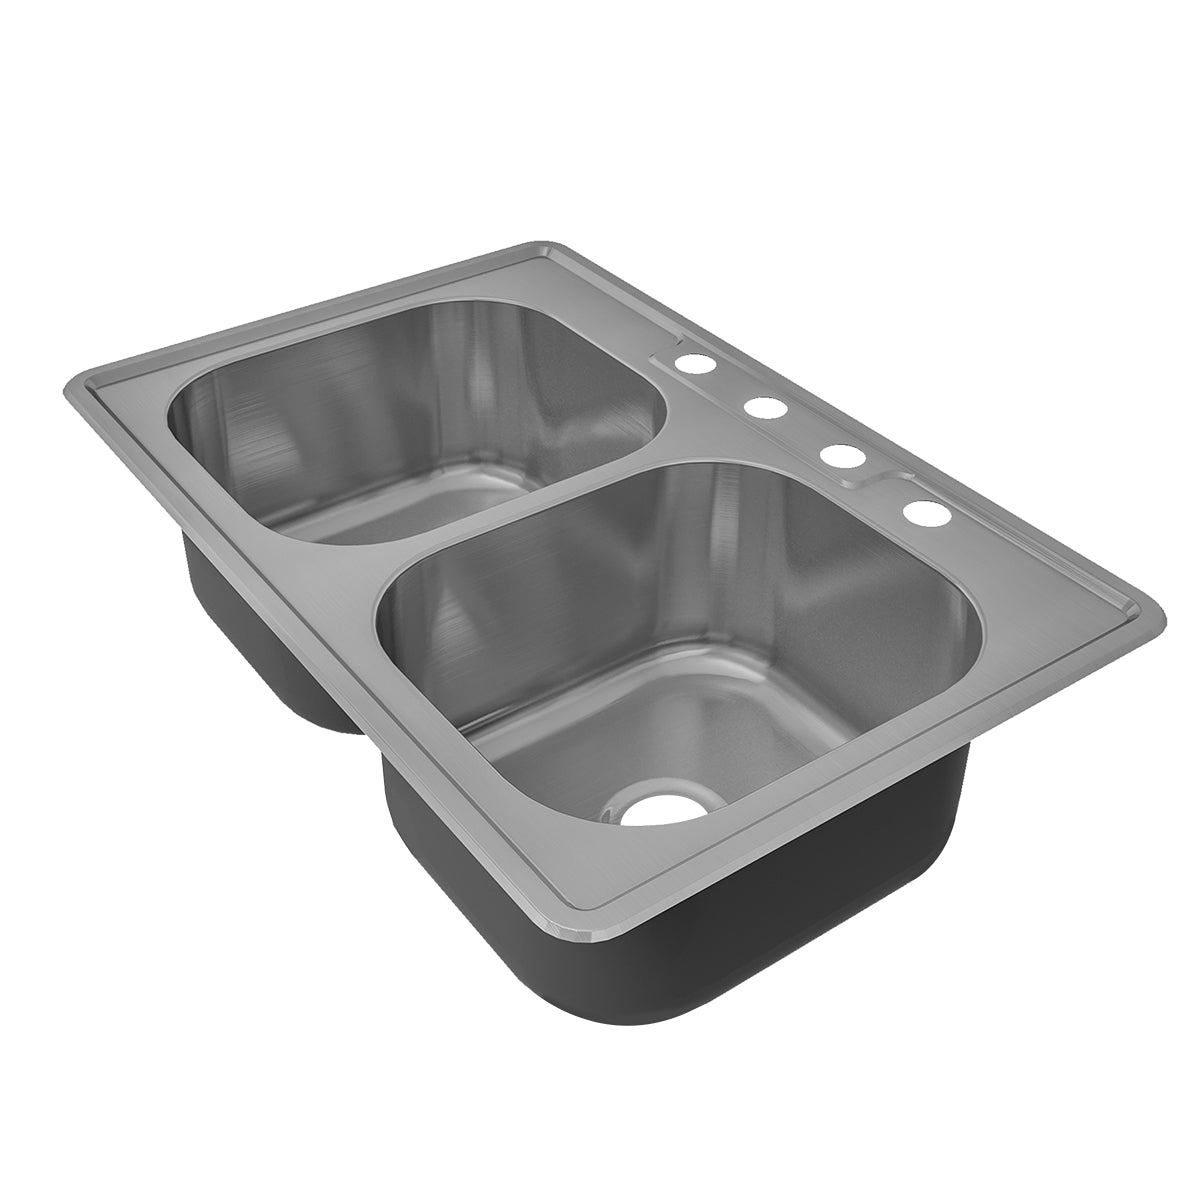 Sinber 33" x 22" x 9" Drop In Double Bowl Kitchen Sink with 18 Gauge 304 Stainless Steel Satin Finish MT3322D (Sink Only)